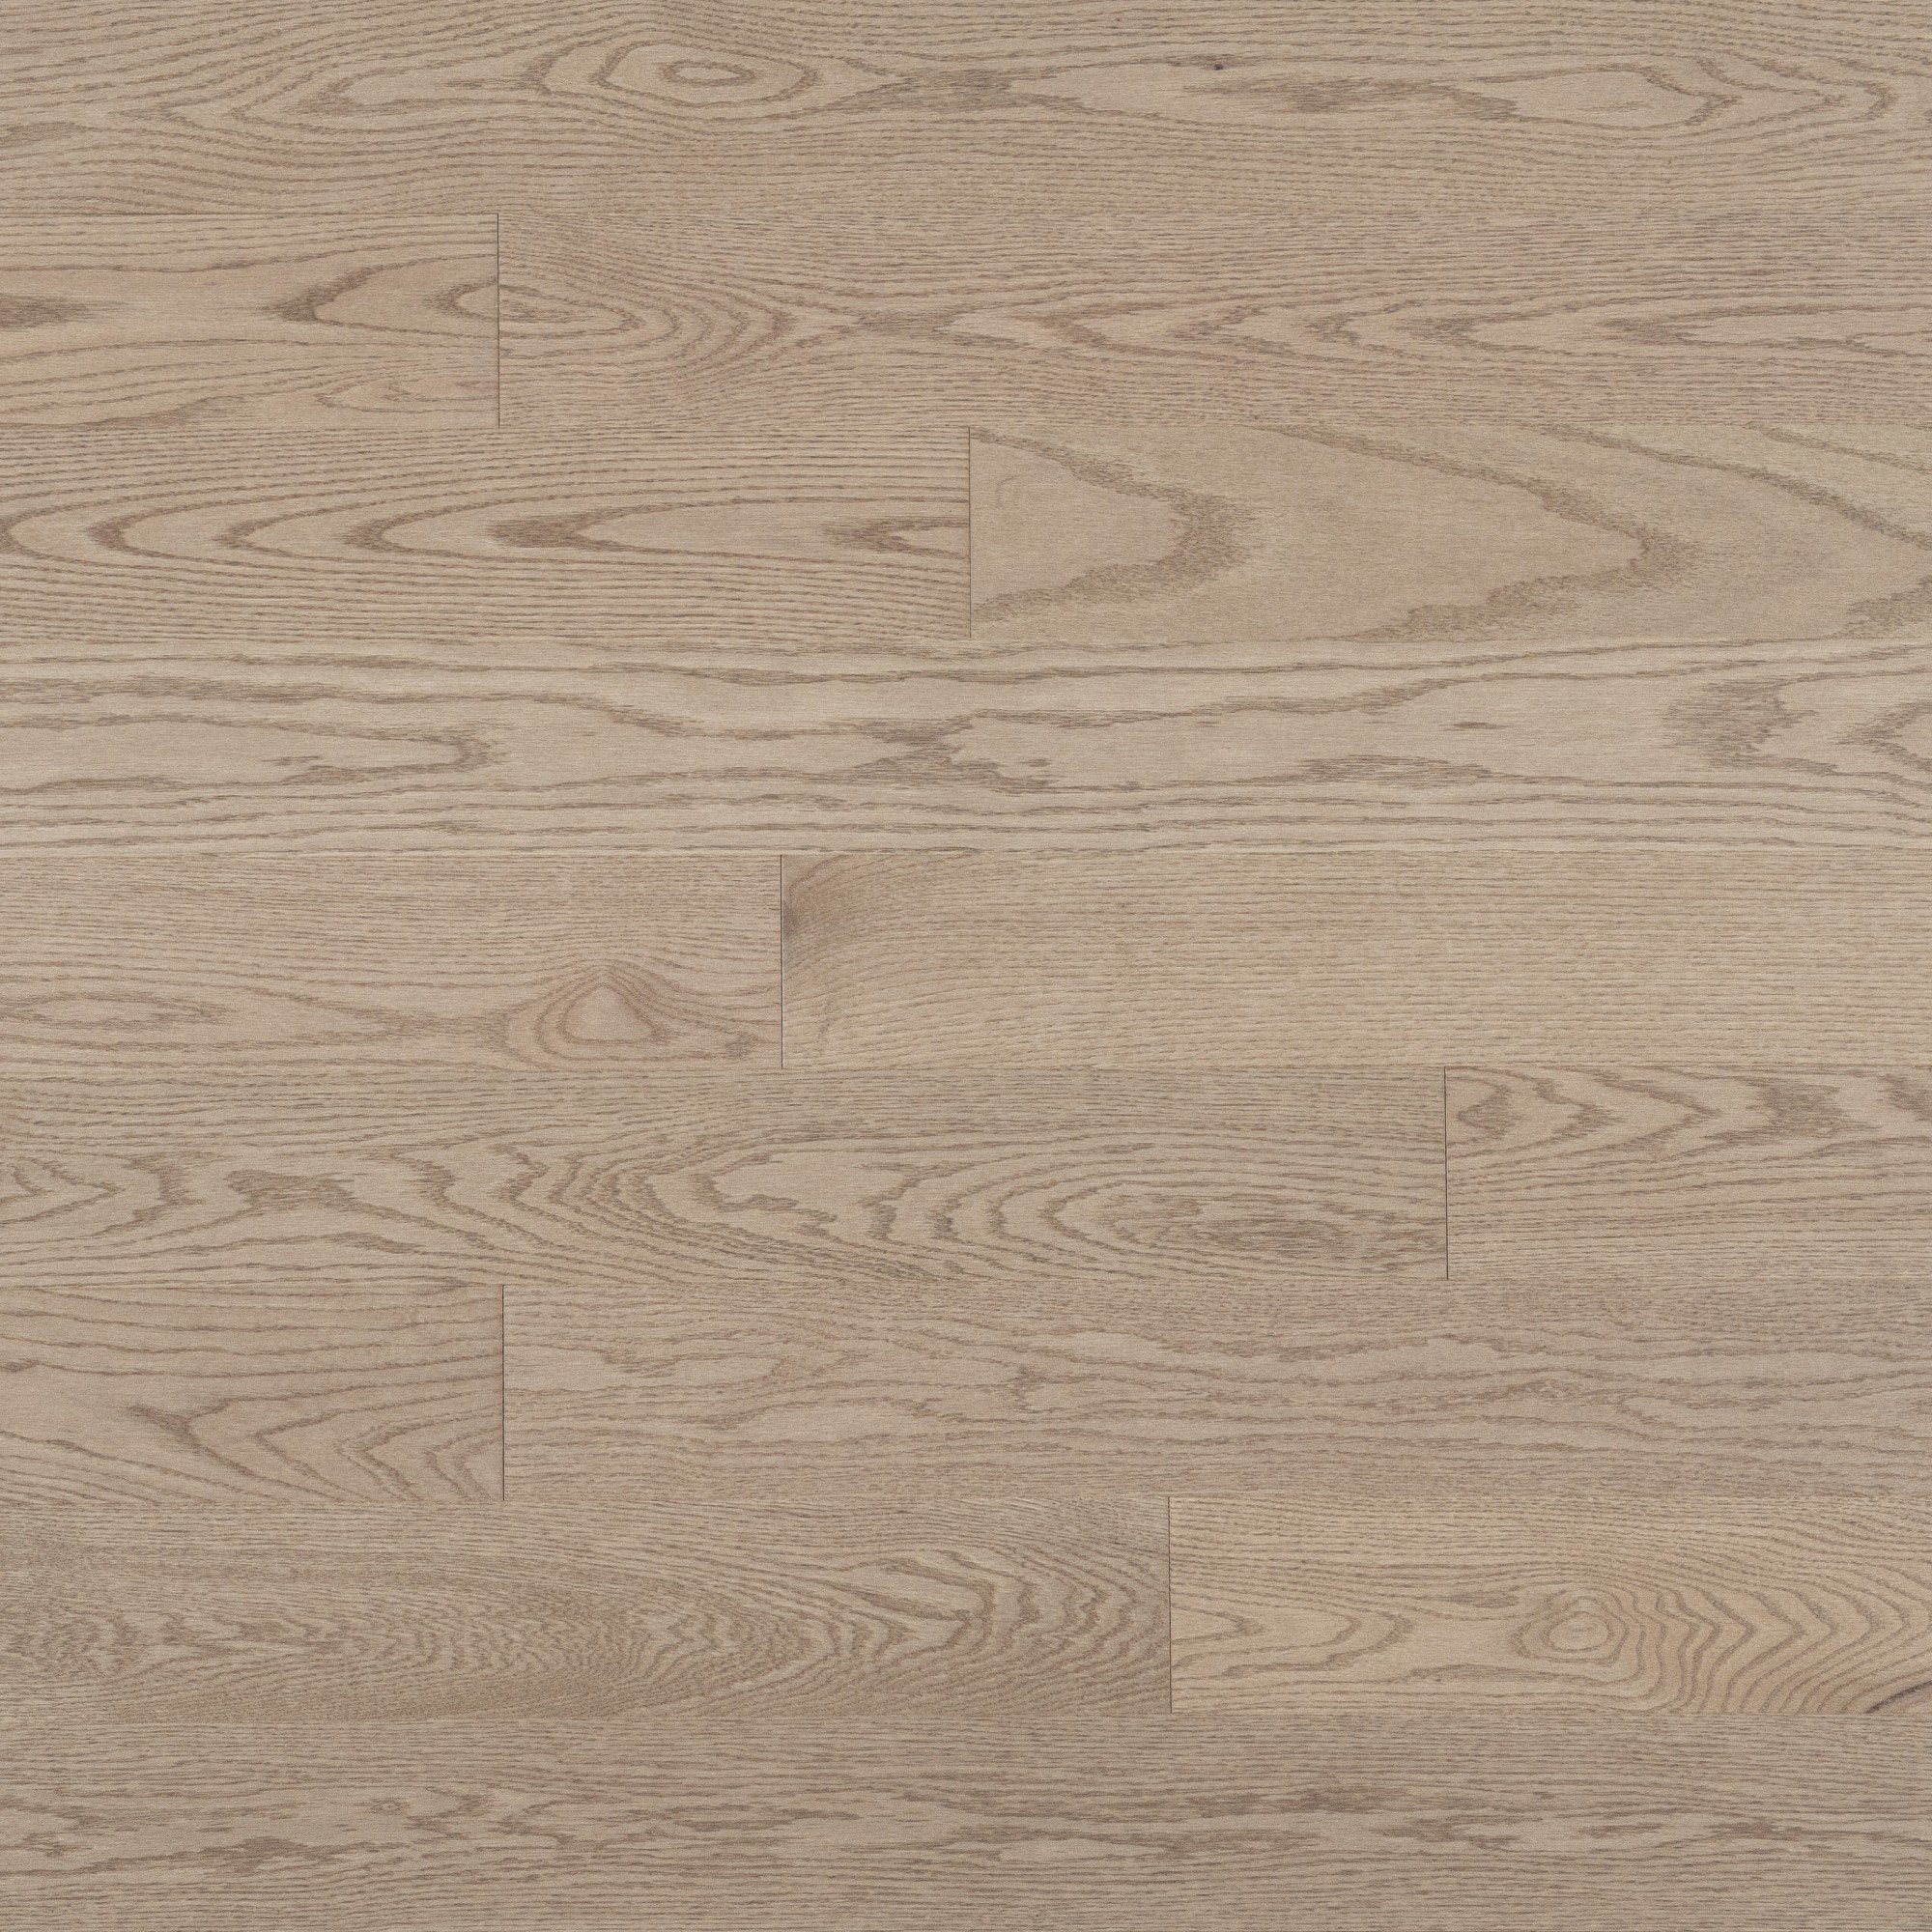 Admiration - Red Oak Rio Exclusive Smooth - Hardwood